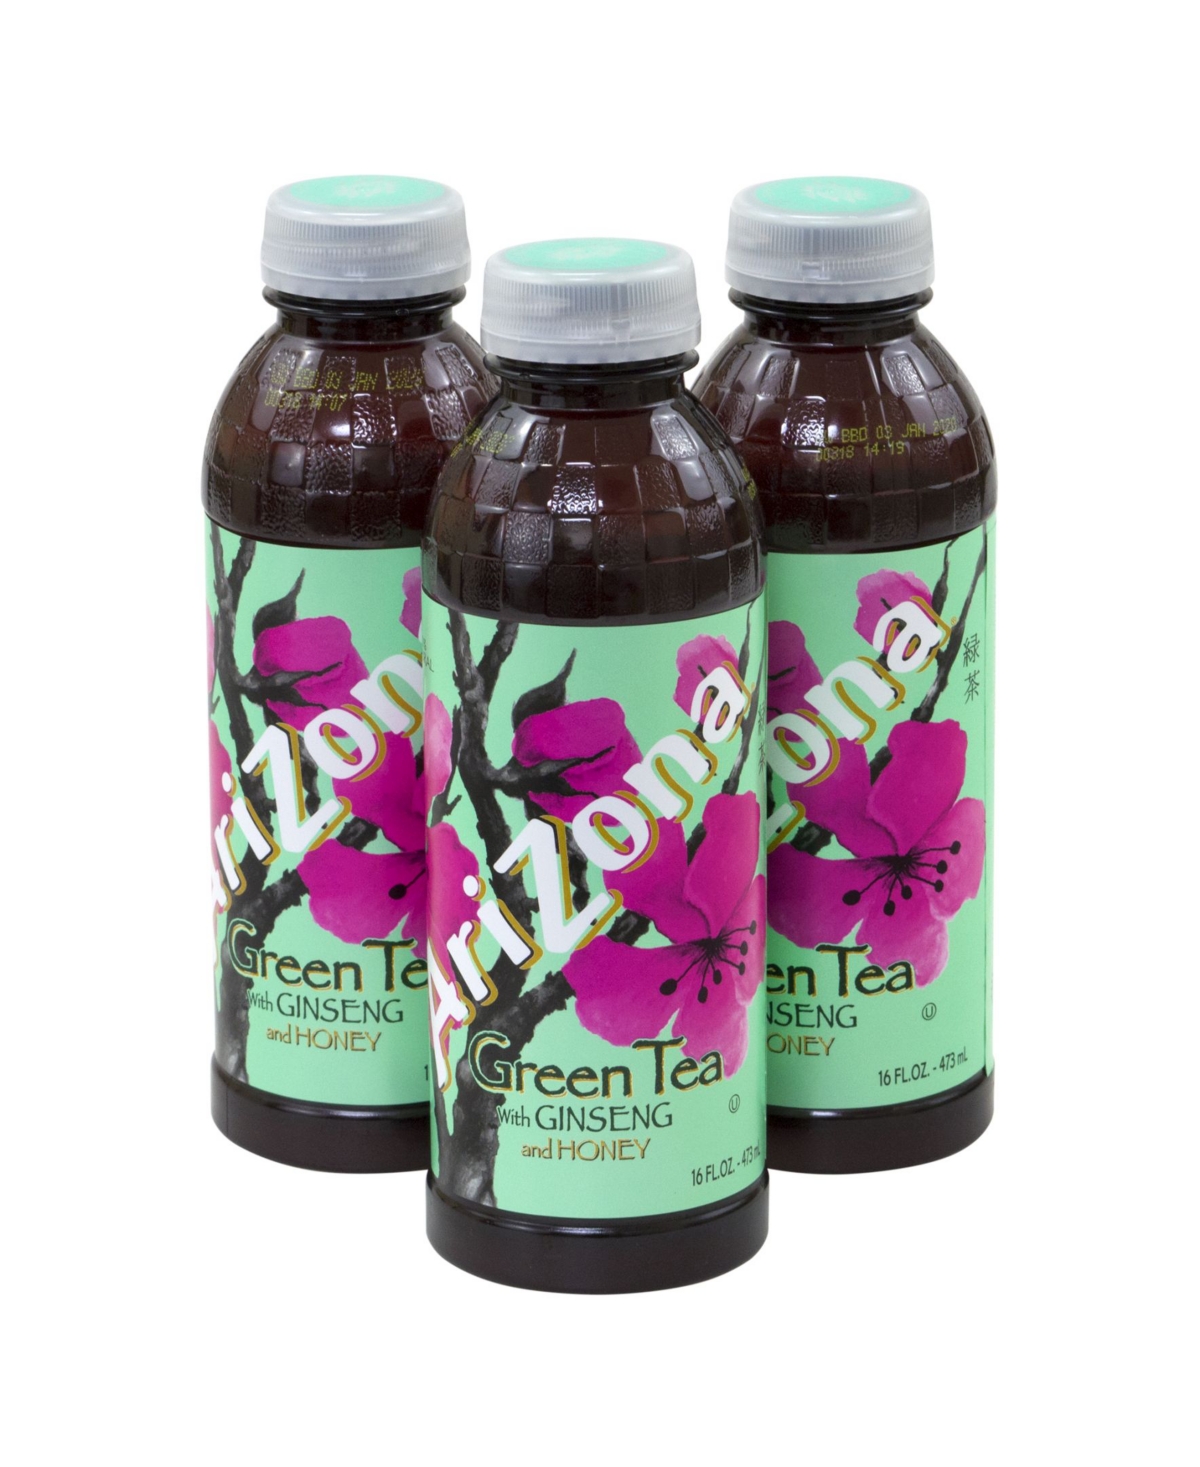 AriZona Green Tea with Ginseng and Honey, Count 24